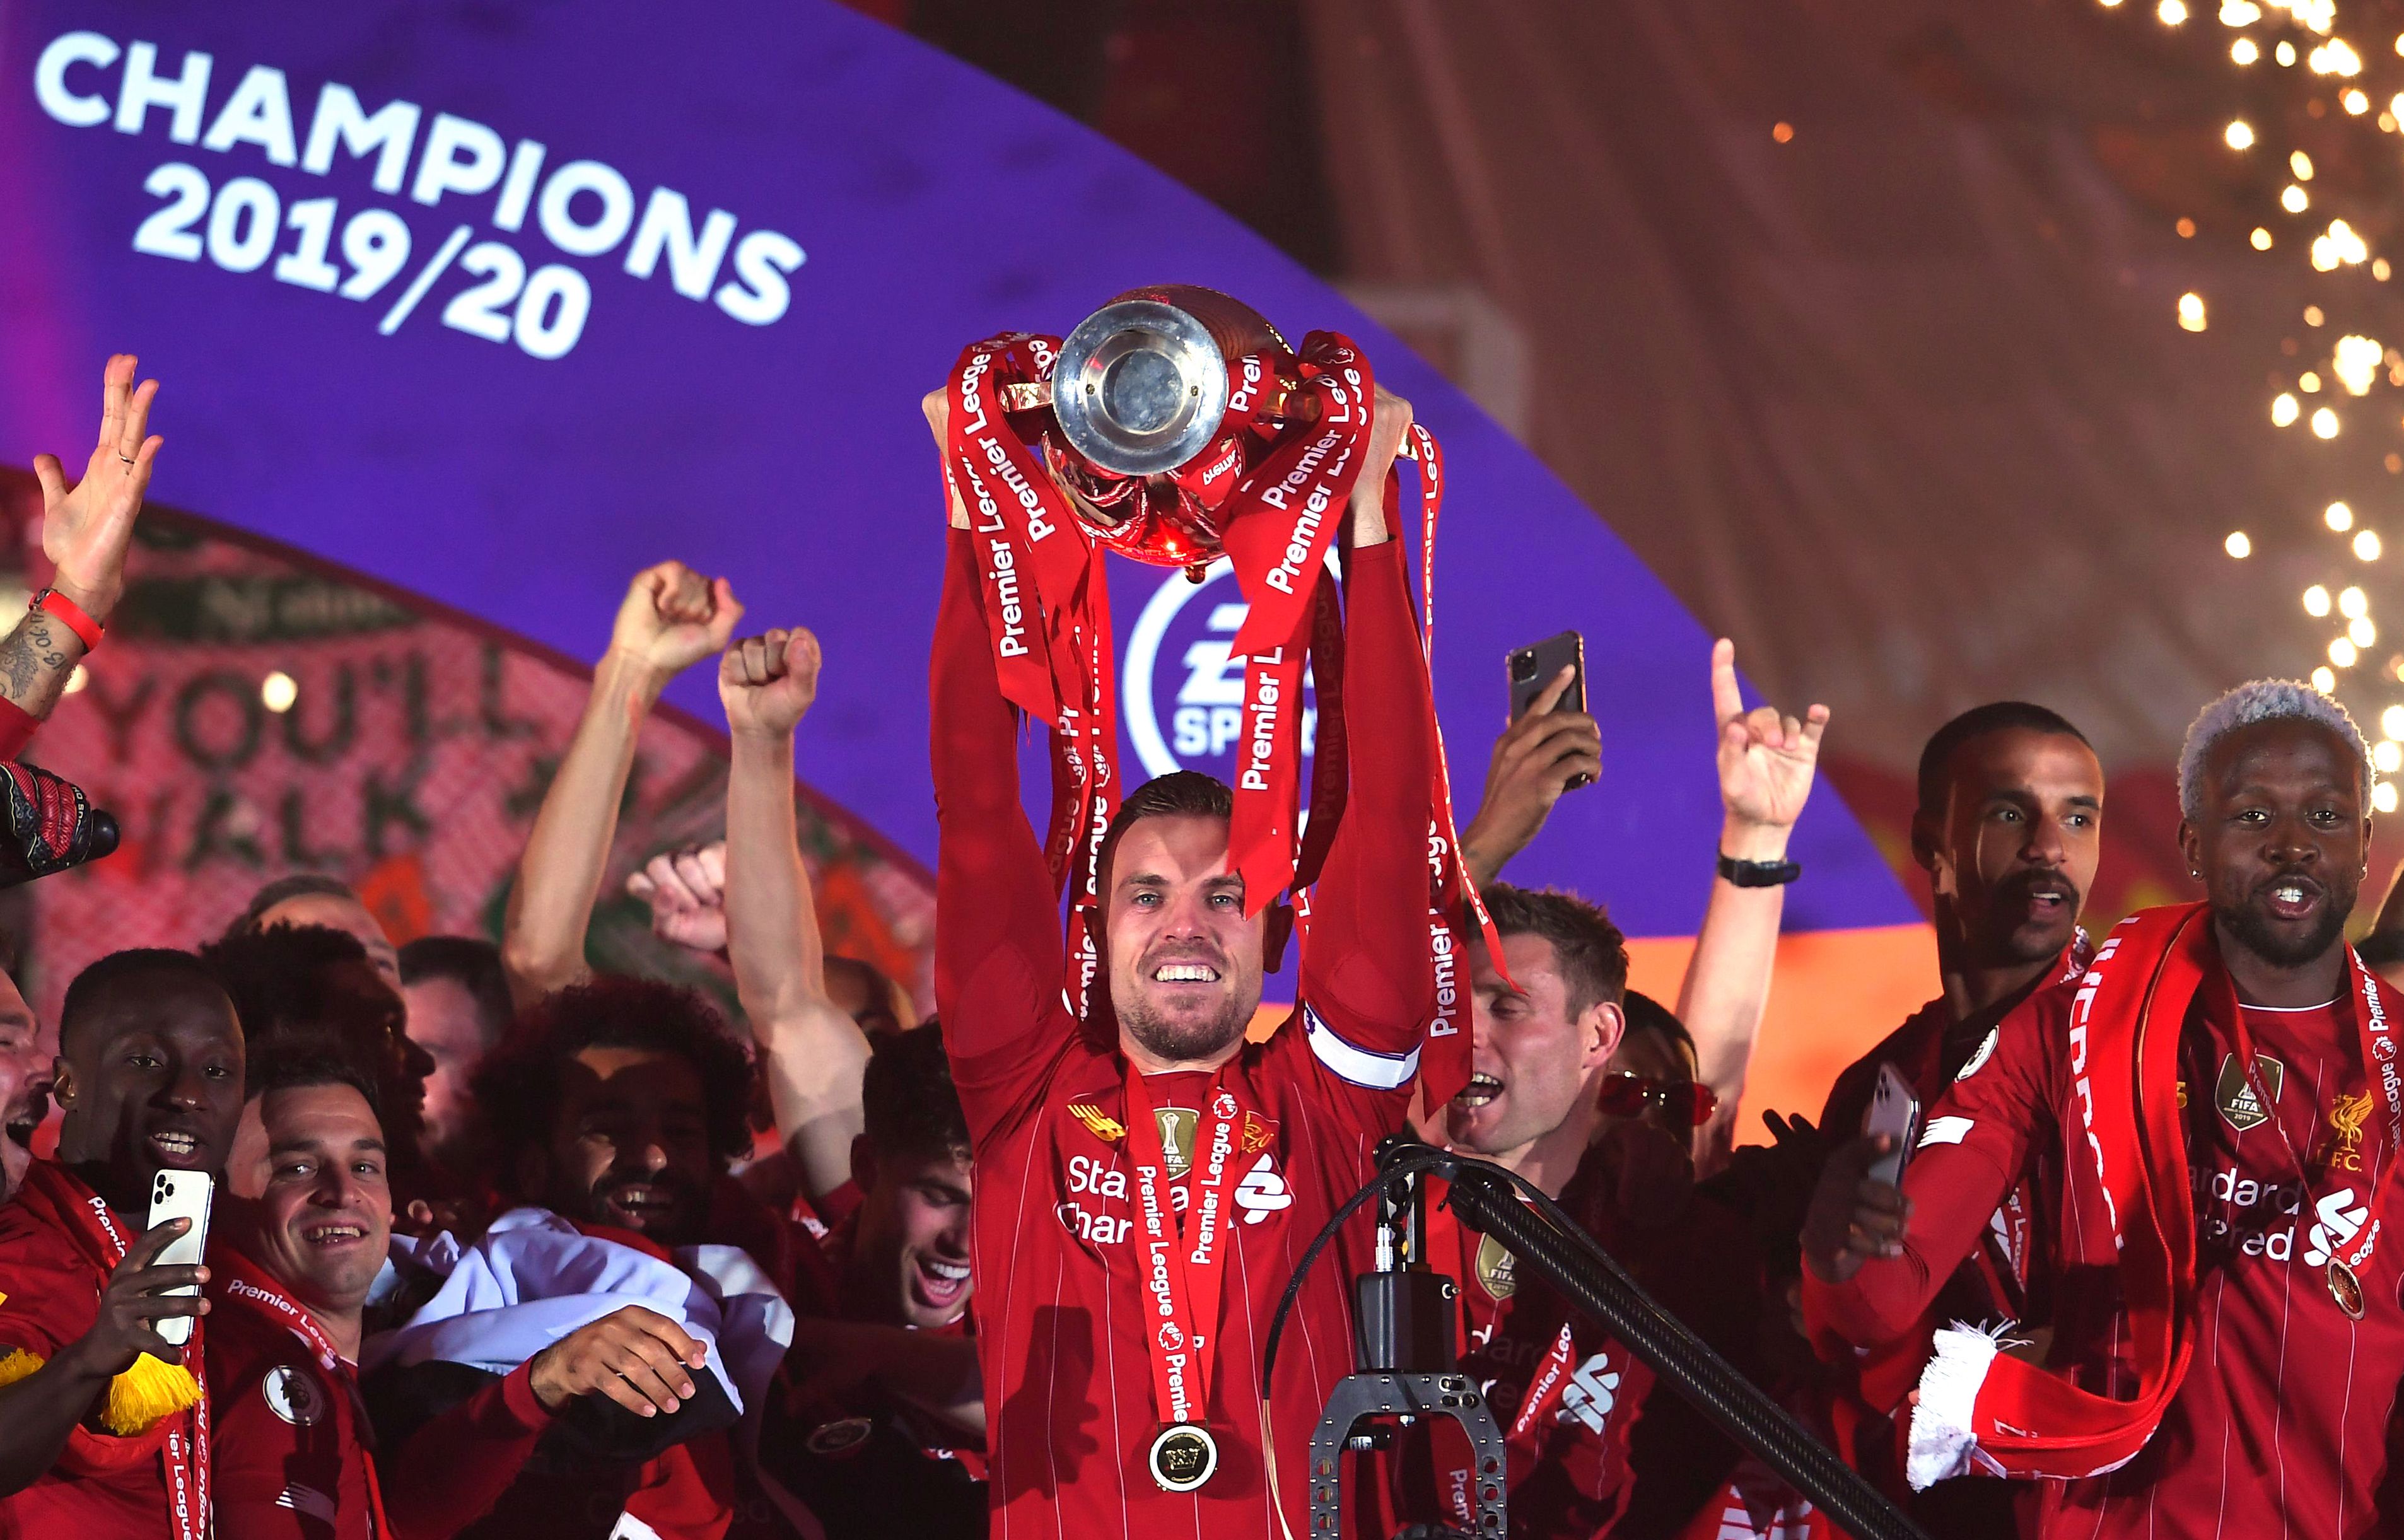 Liverpool trophy lift LIVE: Milner takes aim at Manchester United as Reds celebrate Premier League glory with fireworks, Lampard embraces Mane after Klopp argument